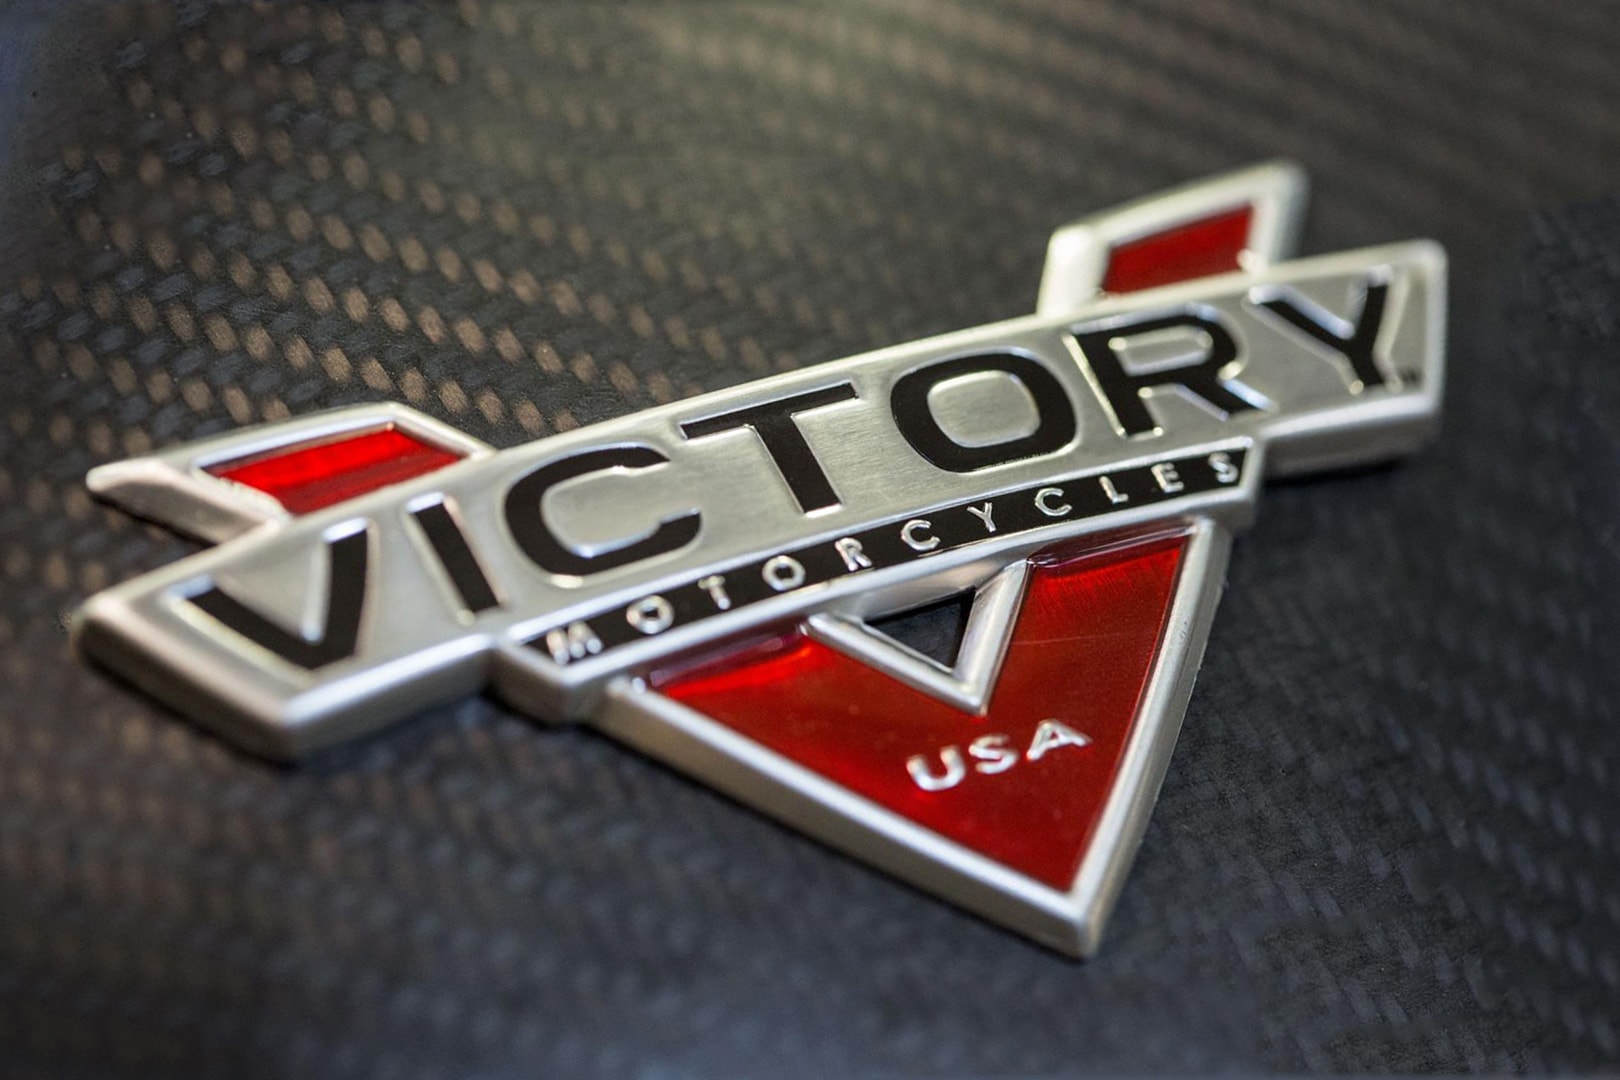 Victory motorcycle logo history and Meaning, bike emblem